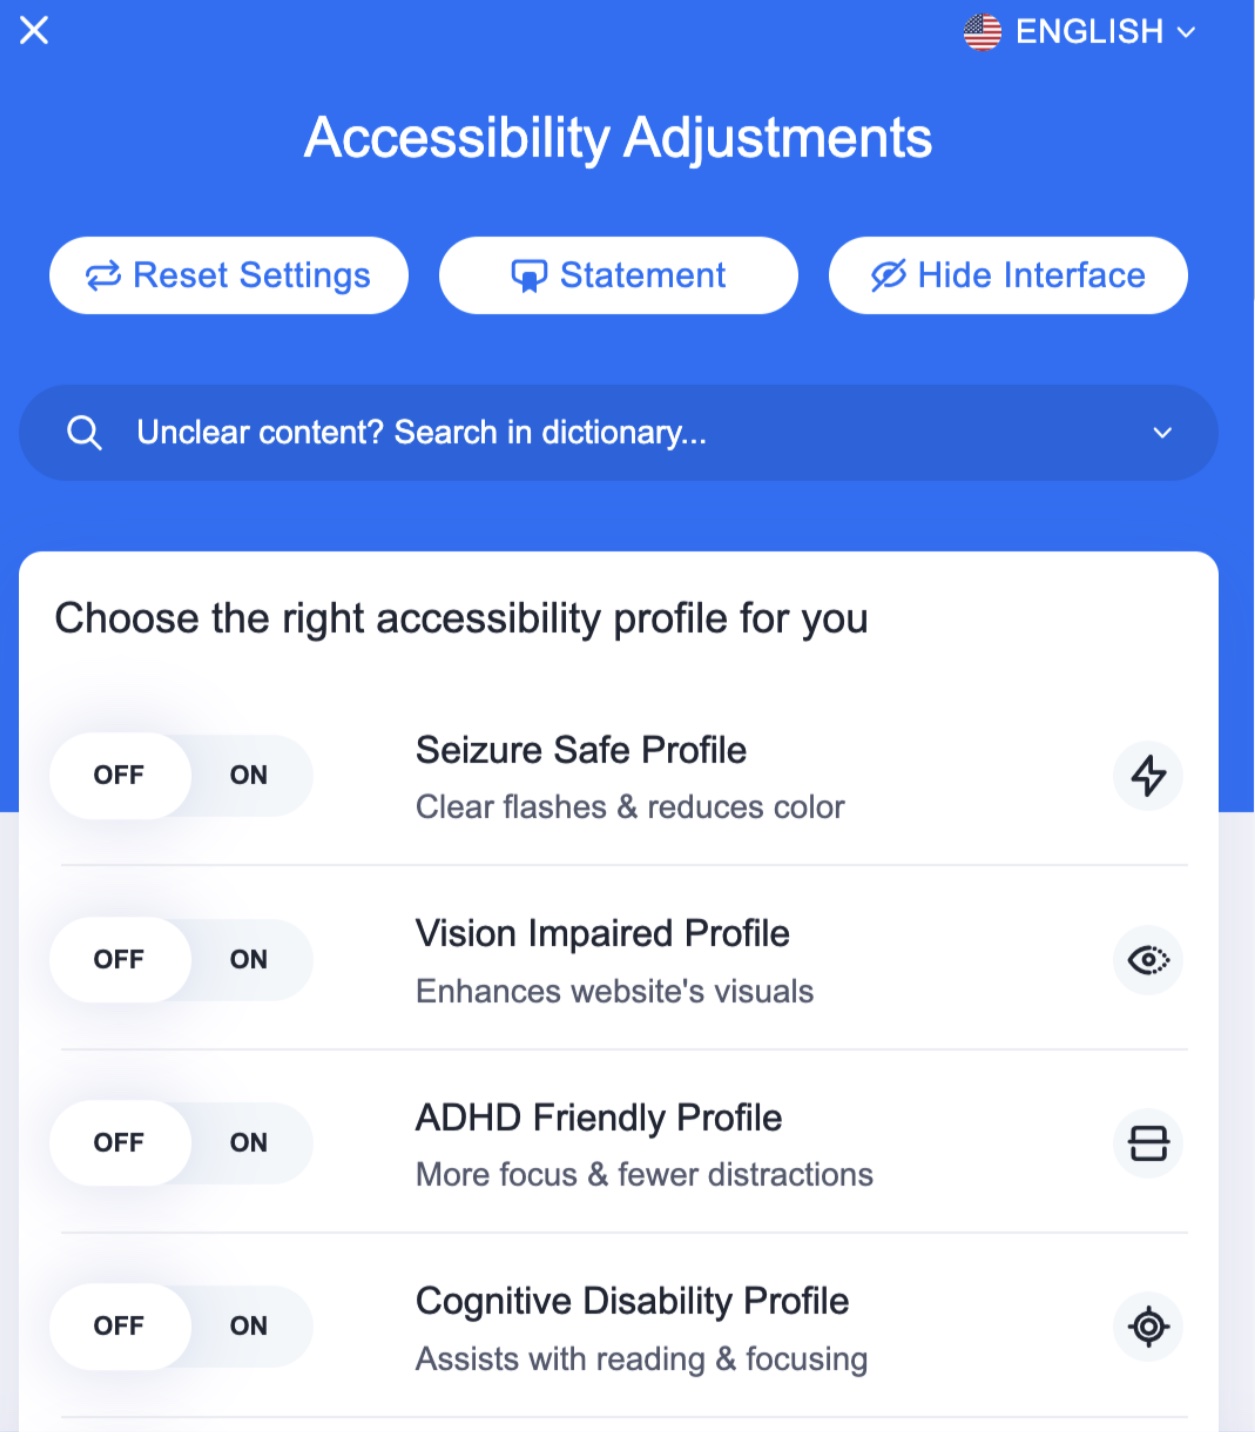 Accessibility Adjustments overview.